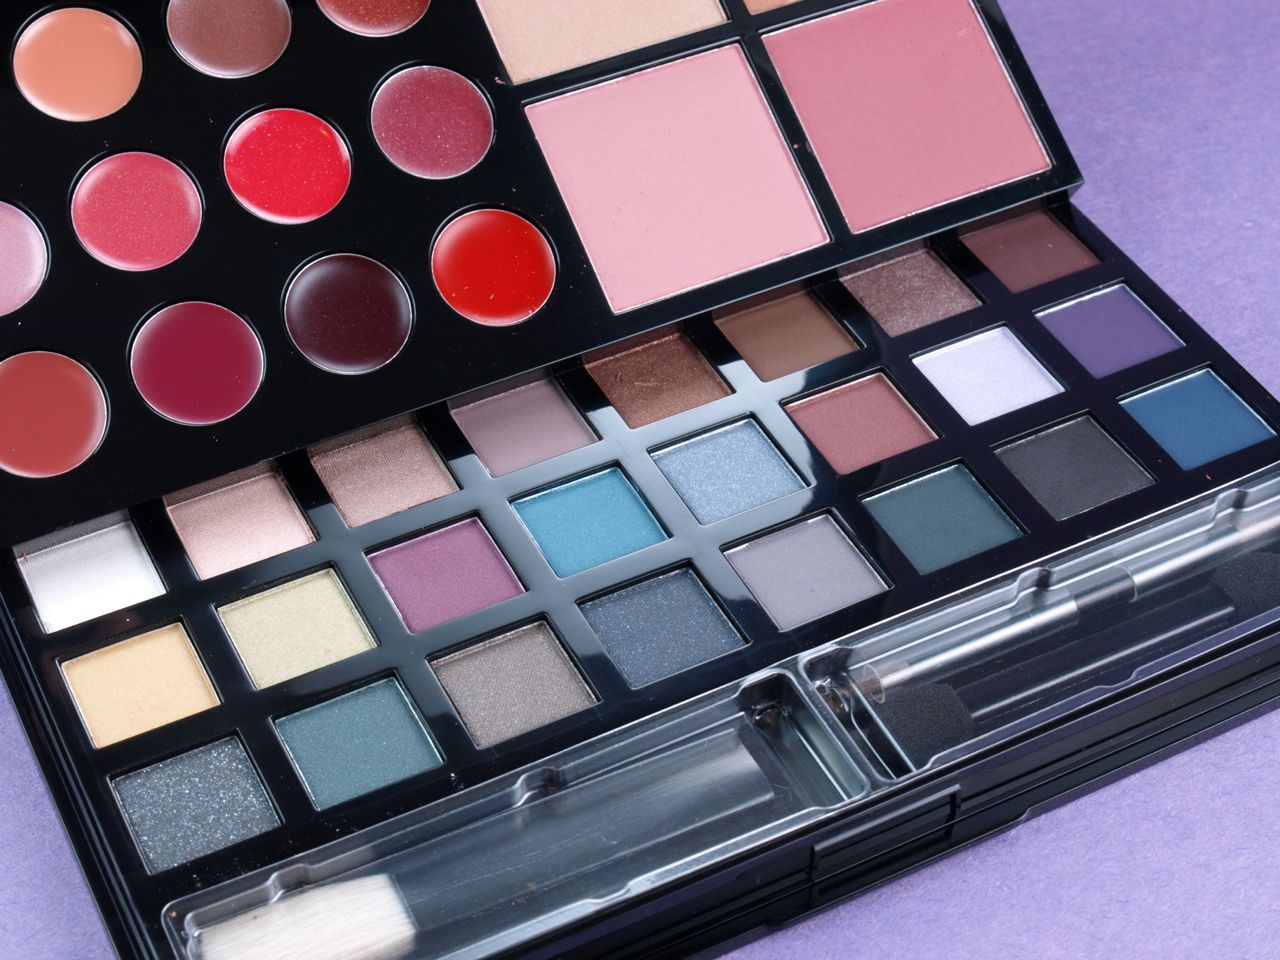 Avon Holiday 2014 Makeup Studio Palette: Review and Swatches